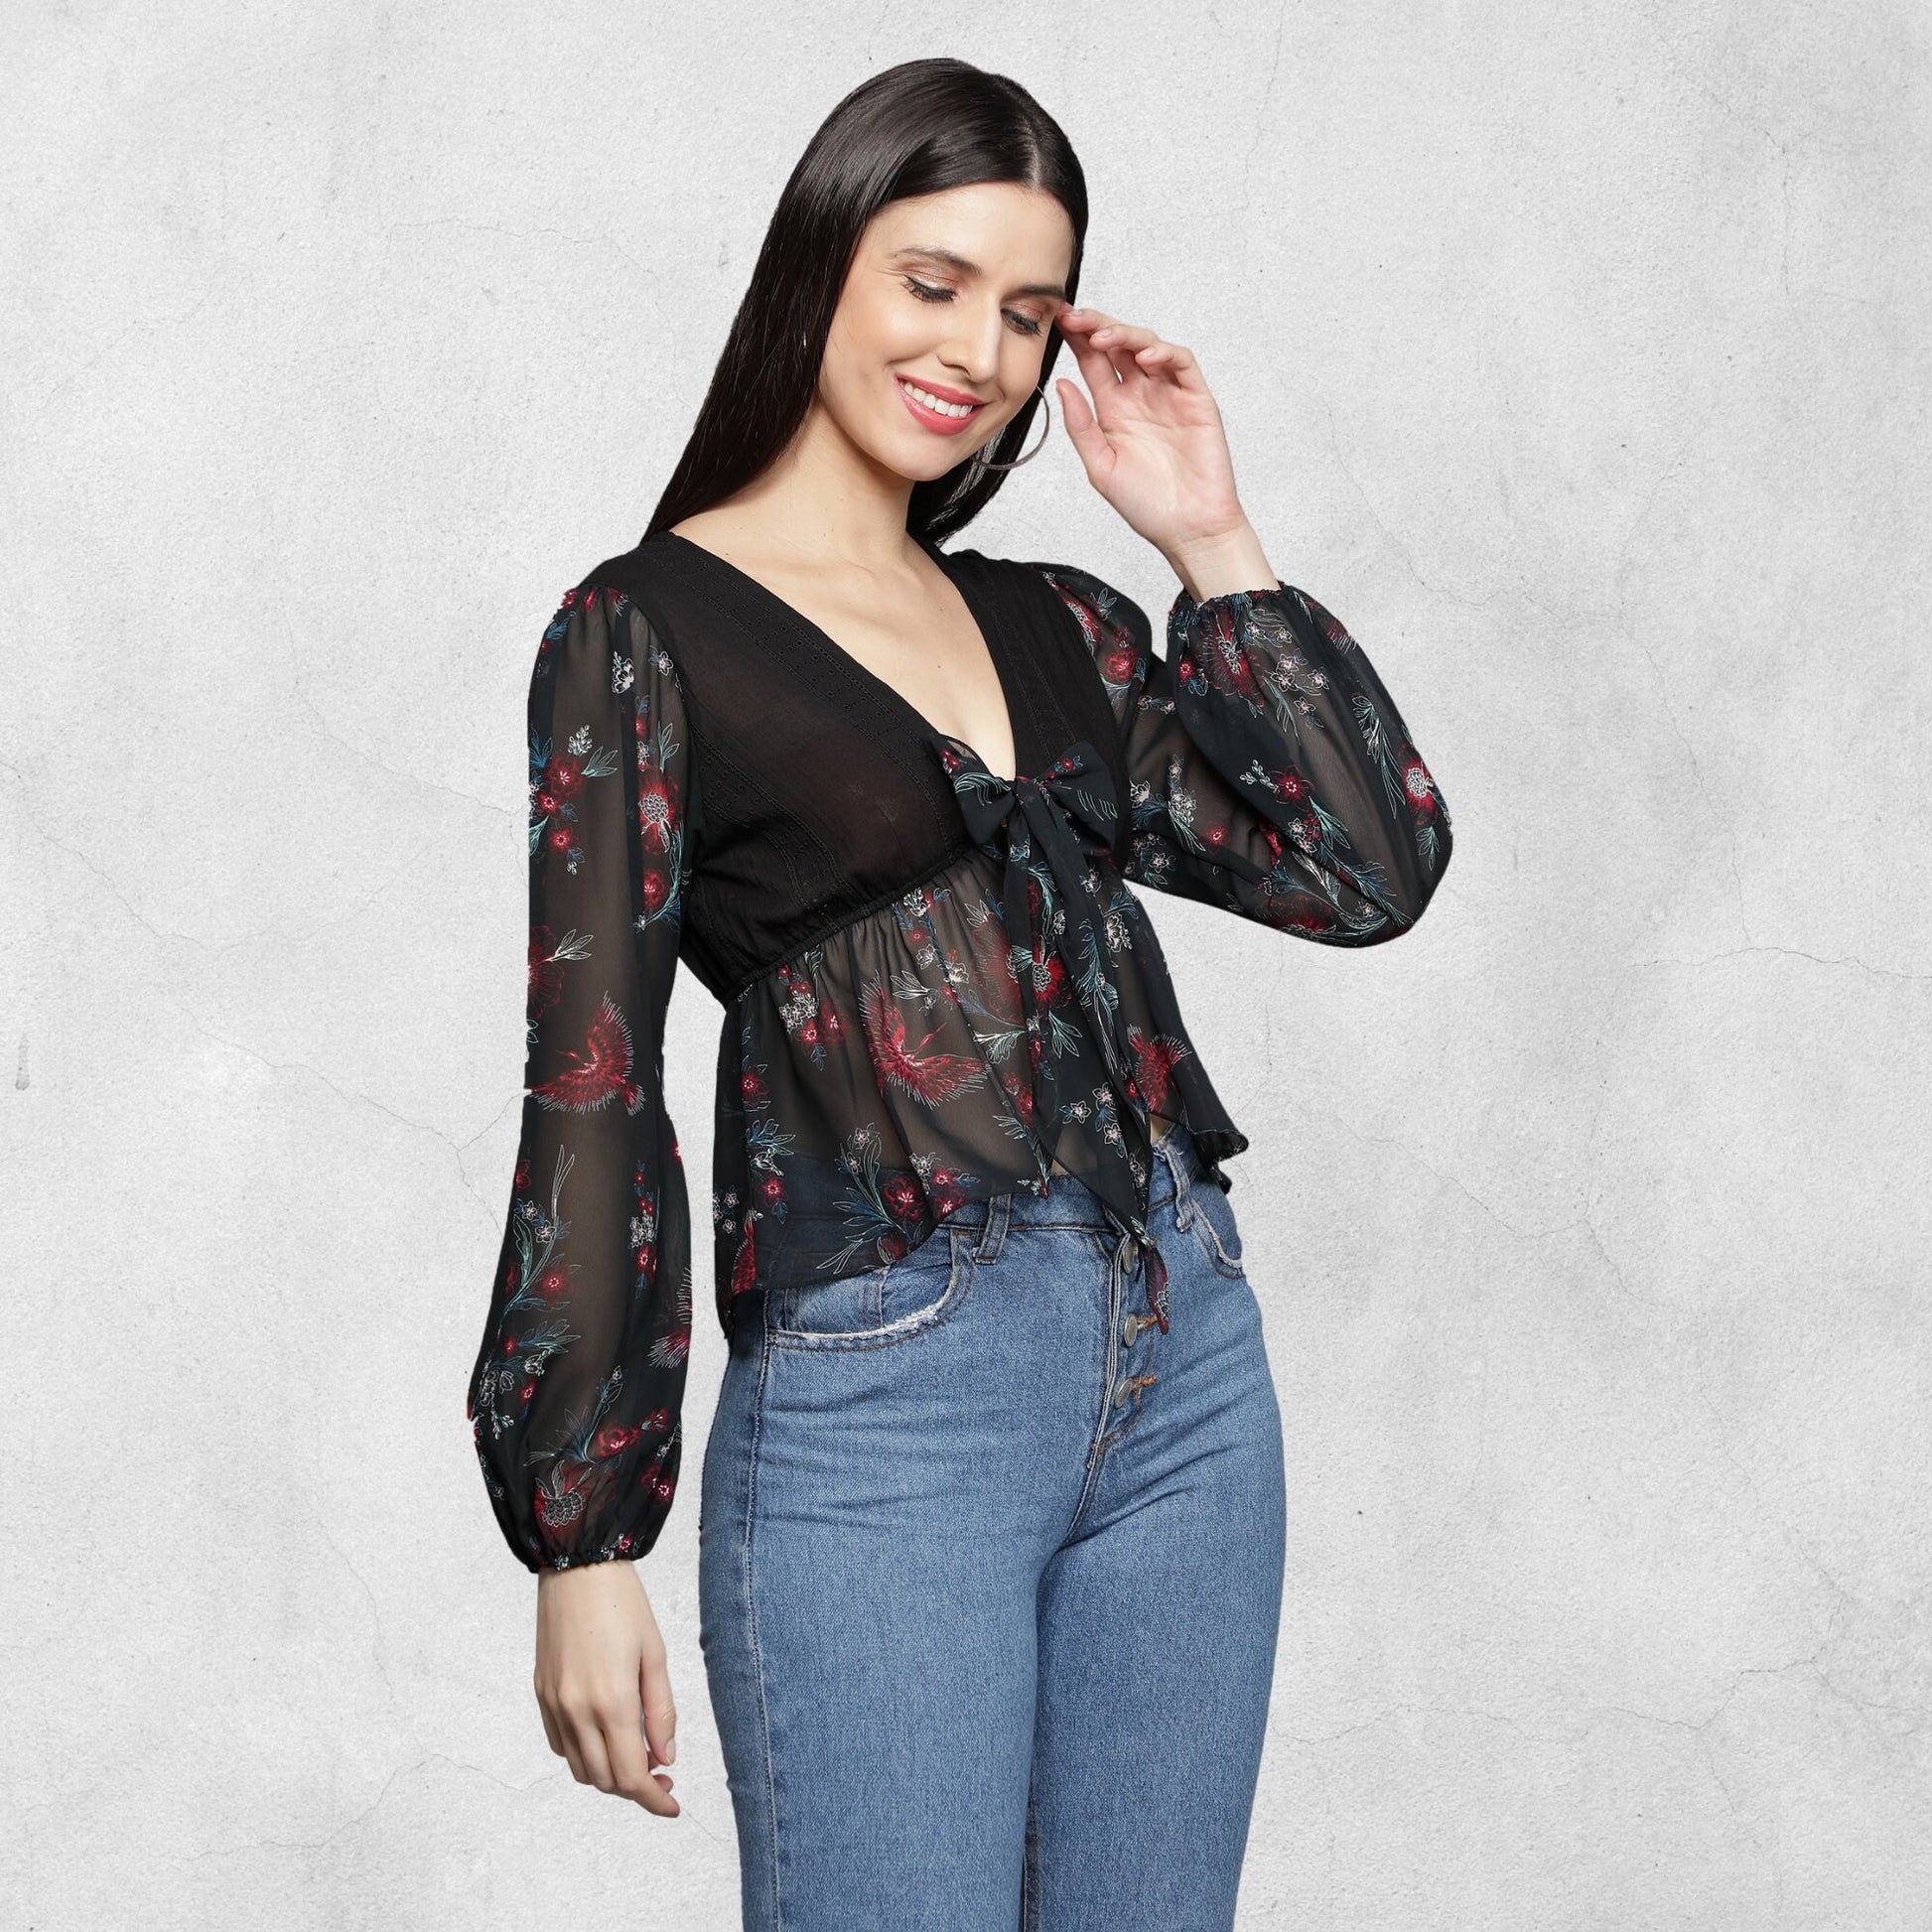 Women's_Black_Top  Top_for_Women  Sexy_Top  Romantic_Top  must_have  Long_Sleeves_Blouse  Long_Sleeves_Black  Georgette_Blouse  for_her_top  Floral_Printed_Top  Bow_tie_top  Black_Top  Black_Printed_Top